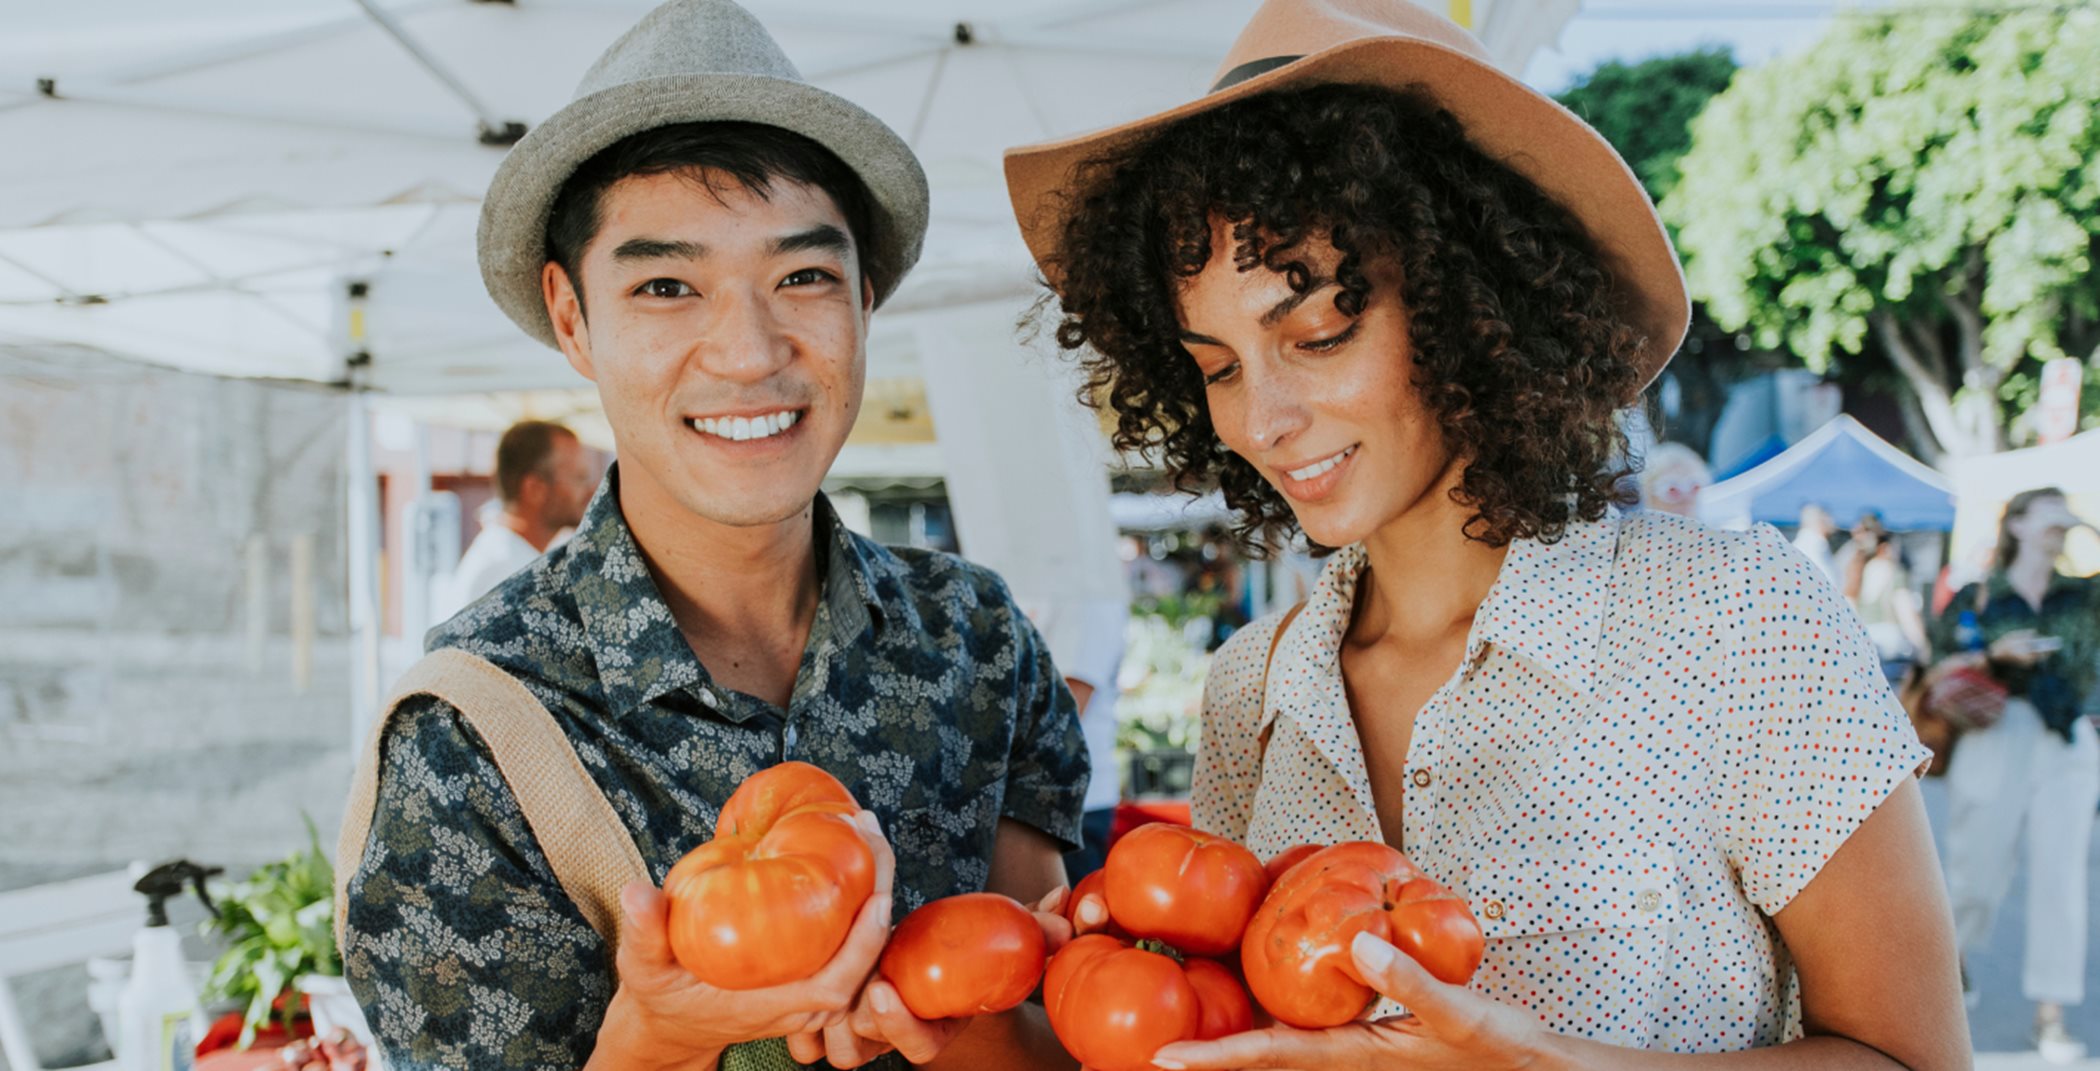 Couple at the farmers market